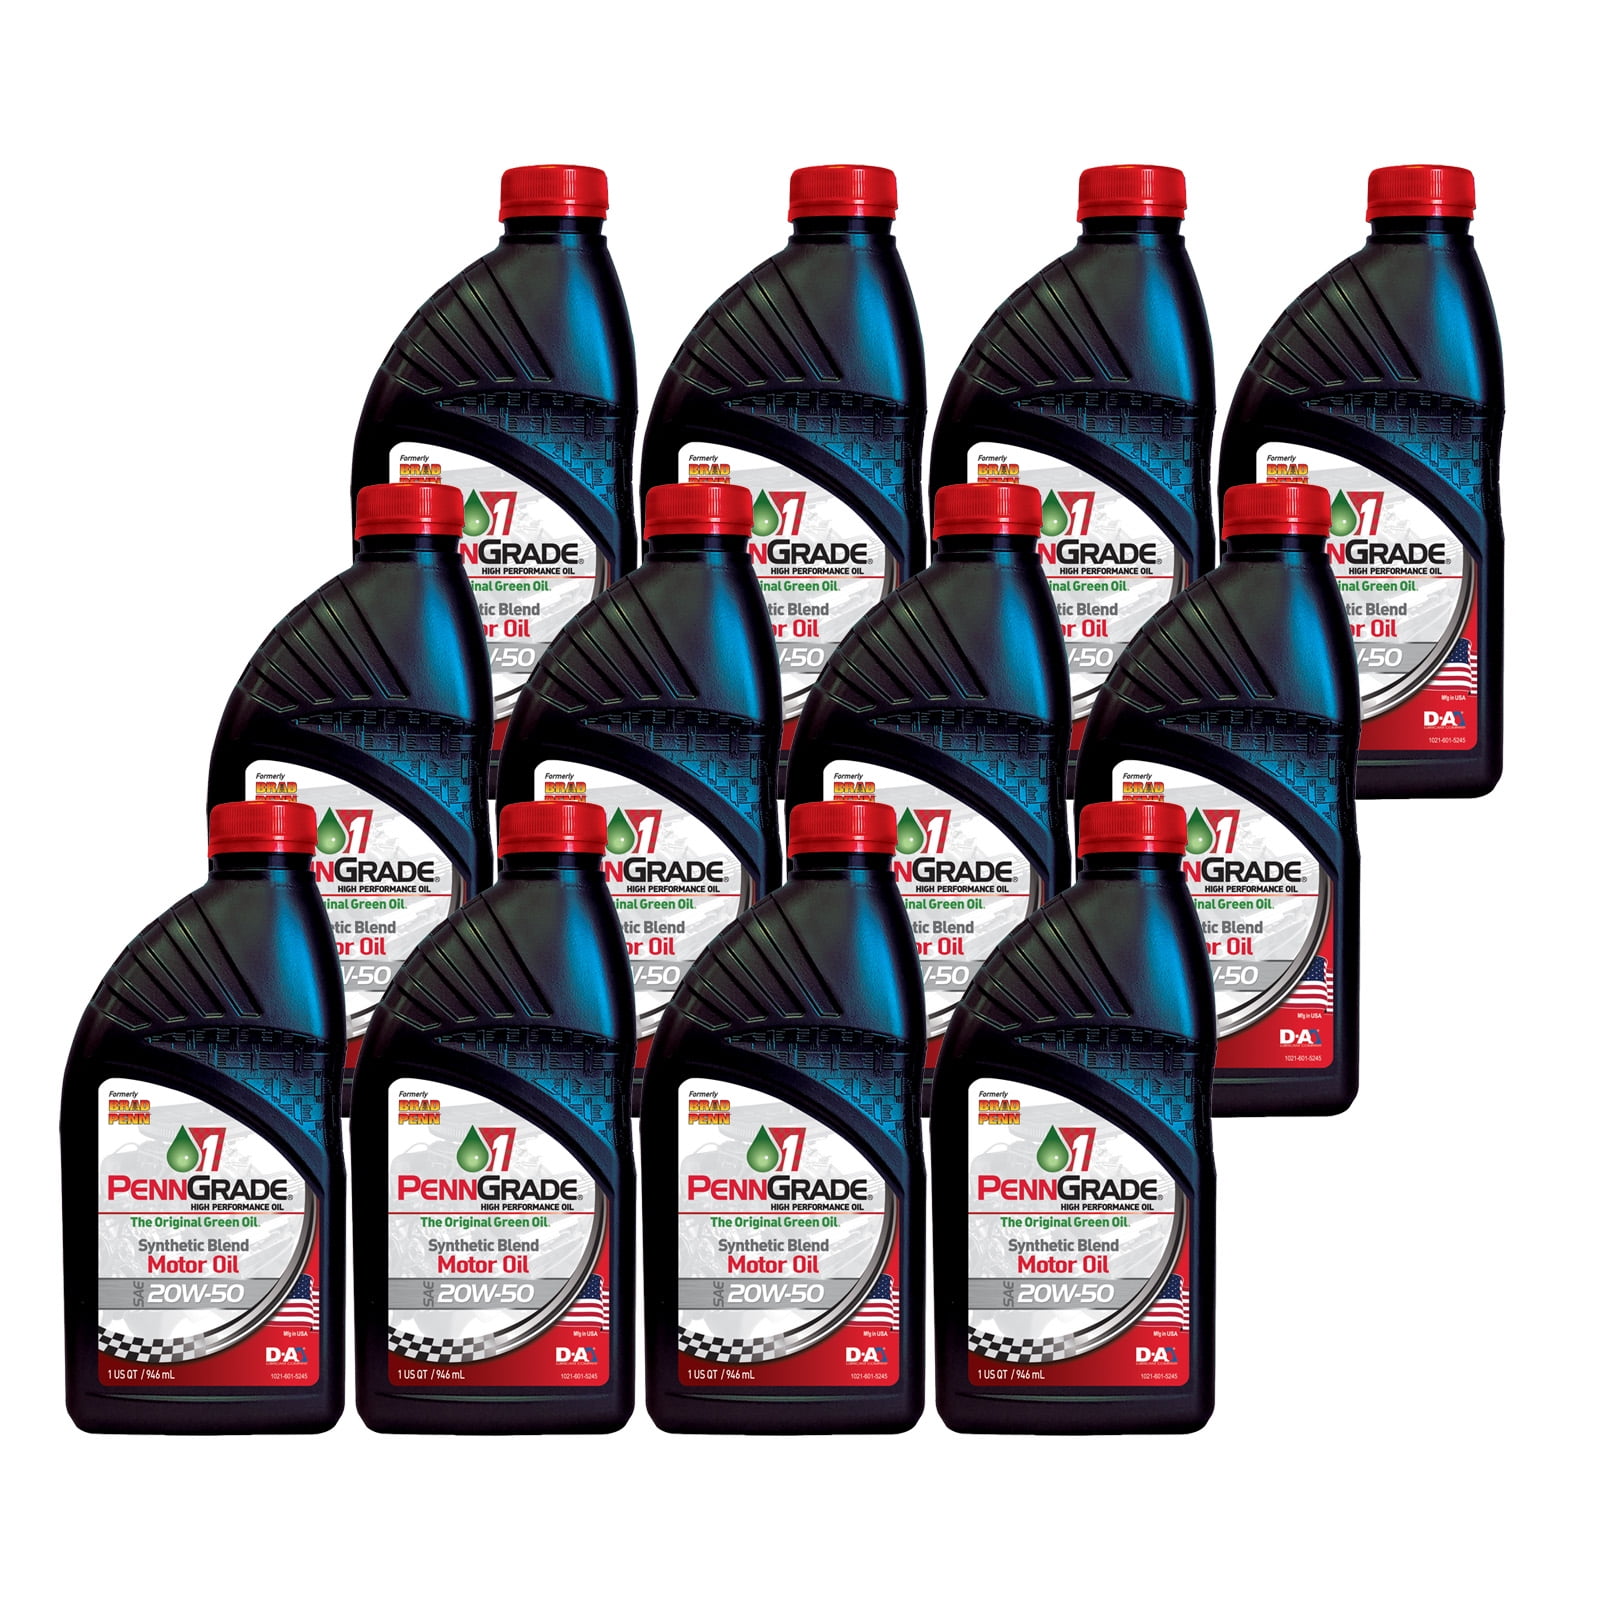 PENNGRADE 1® SYNTHETIC BLEND HIGH PERFORMANCE OIL SAE 5W-30